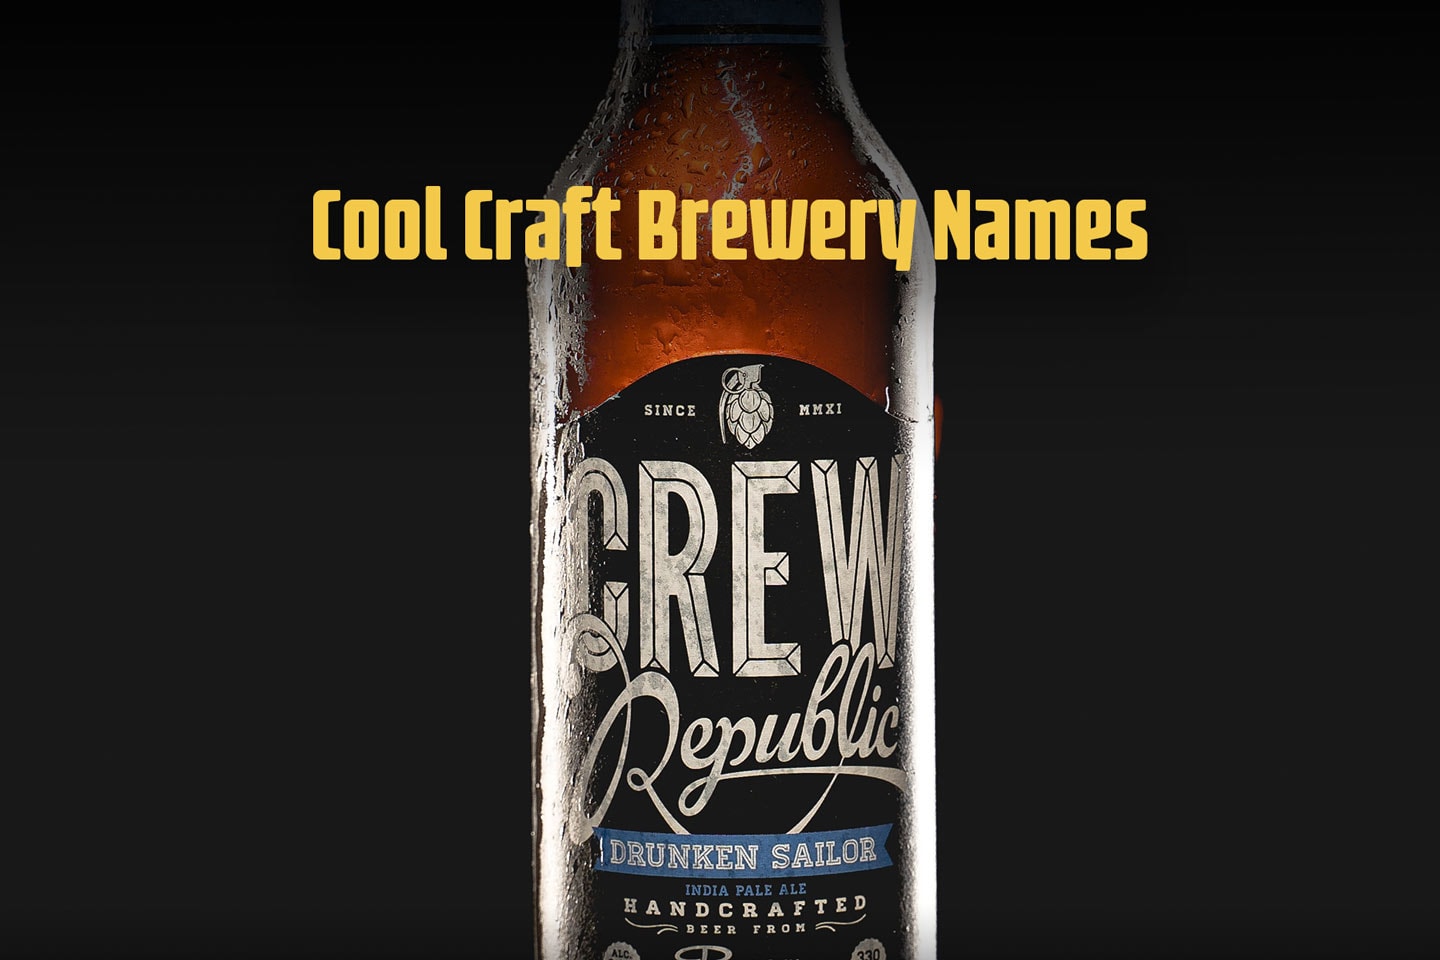 Cool Craft Brewery Names